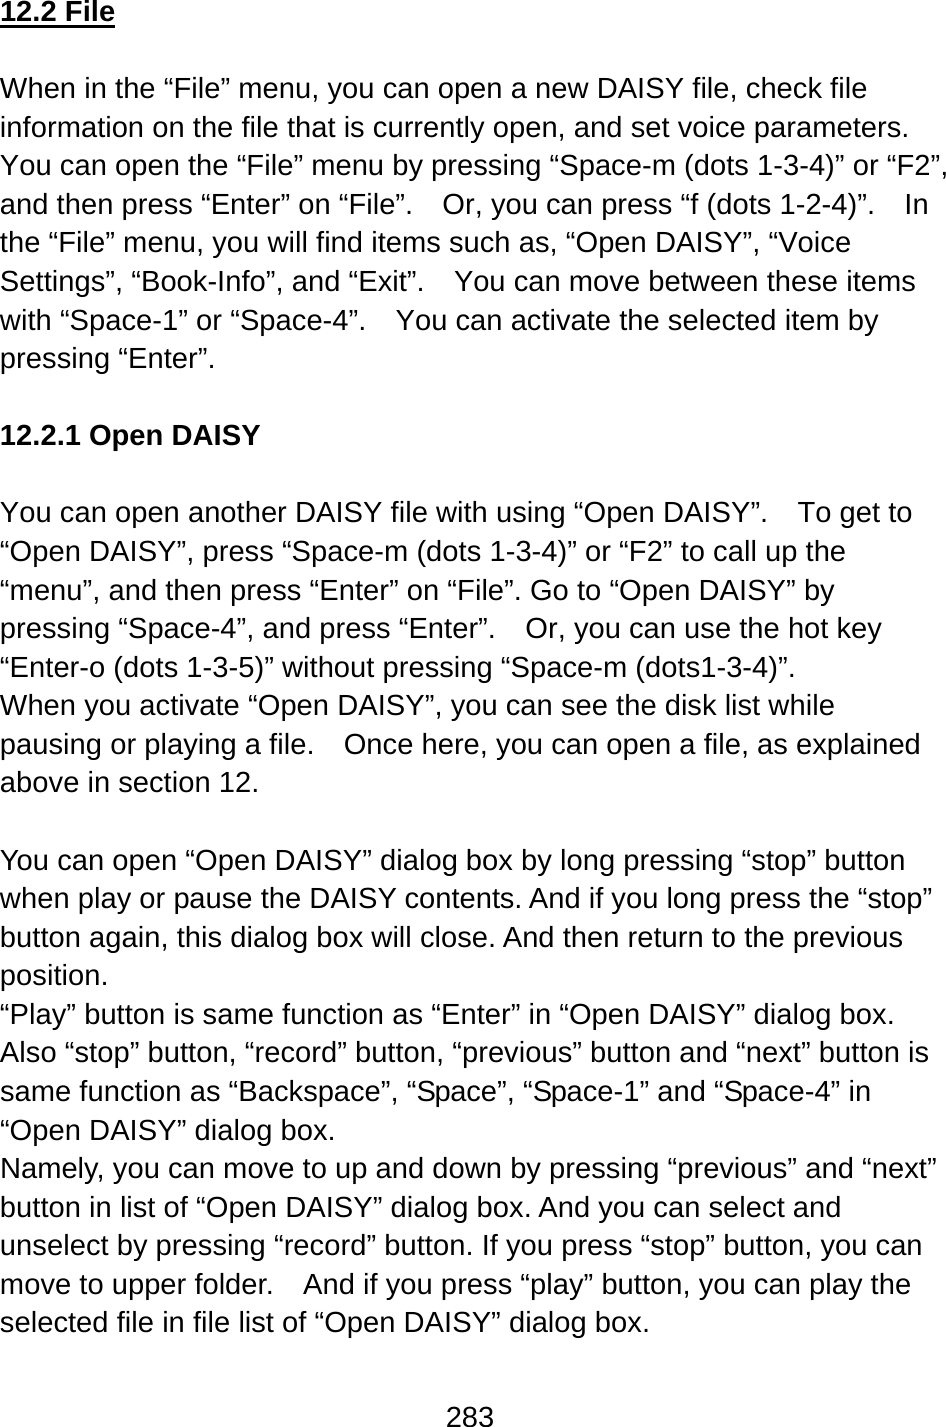 283  12.2 File  When in the “File” menu, you can open a new DAISY file, check file information on the file that is currently open, and set voice parameters.   You can open the “File” menu by pressing “Space-m (dots 1-3-4)” or “F2”, and then press “Enter” on “File”.    Or, you can press “f (dots 1-2-4)”.    In the “File” menu, you will find items such as, “Open DAISY”, “Voice Settings”, “Book-Info”, and “Exit”.    You can move between these items with “Space-1” or “Space-4”.    You can activate the selected item by pressing “Enter”.  12.2.1 Open DAISY  You can open another DAISY file with using “Open DAISY”.    To get to “Open DAISY”, press “Space-m (dots 1-3-4)” or “F2” to call up the “menu”, and then press “Enter” on “File”. Go to “Open DAISY” by pressing “Space-4”, and press “Enter”.    Or, you can use the hot key “Enter-o (dots 1-3-5)” without pressing “Space-m (dots1-3-4)”. When you activate “Open DAISY”, you can see the disk list while pausing or playing a file.    Once here, you can open a file, as explained above in section 12.  You can open “Open DAISY” dialog box by long pressing “stop” button when play or pause the DAISY contents. And if you long press the “stop” button again, this dialog box will close. And then return to the previous position. “Play” button is same function as “Enter” in “Open DAISY” dialog box. Also “stop” button, “record” button, “previous” button and “next” button is same function as “Backspace”, “Space”, “Space-1” and “Space-4” in “Open DAISY” dialog box. Namely, you can move to up and down by pressing “previous” and “next” button in list of “Open DAISY” dialog box. And you can select and unselect by pressing “record” button. If you press “stop” button, you can move to upper folder.    And if you press “play” button, you can play the selected file in file list of “Open DAISY” dialog box. 